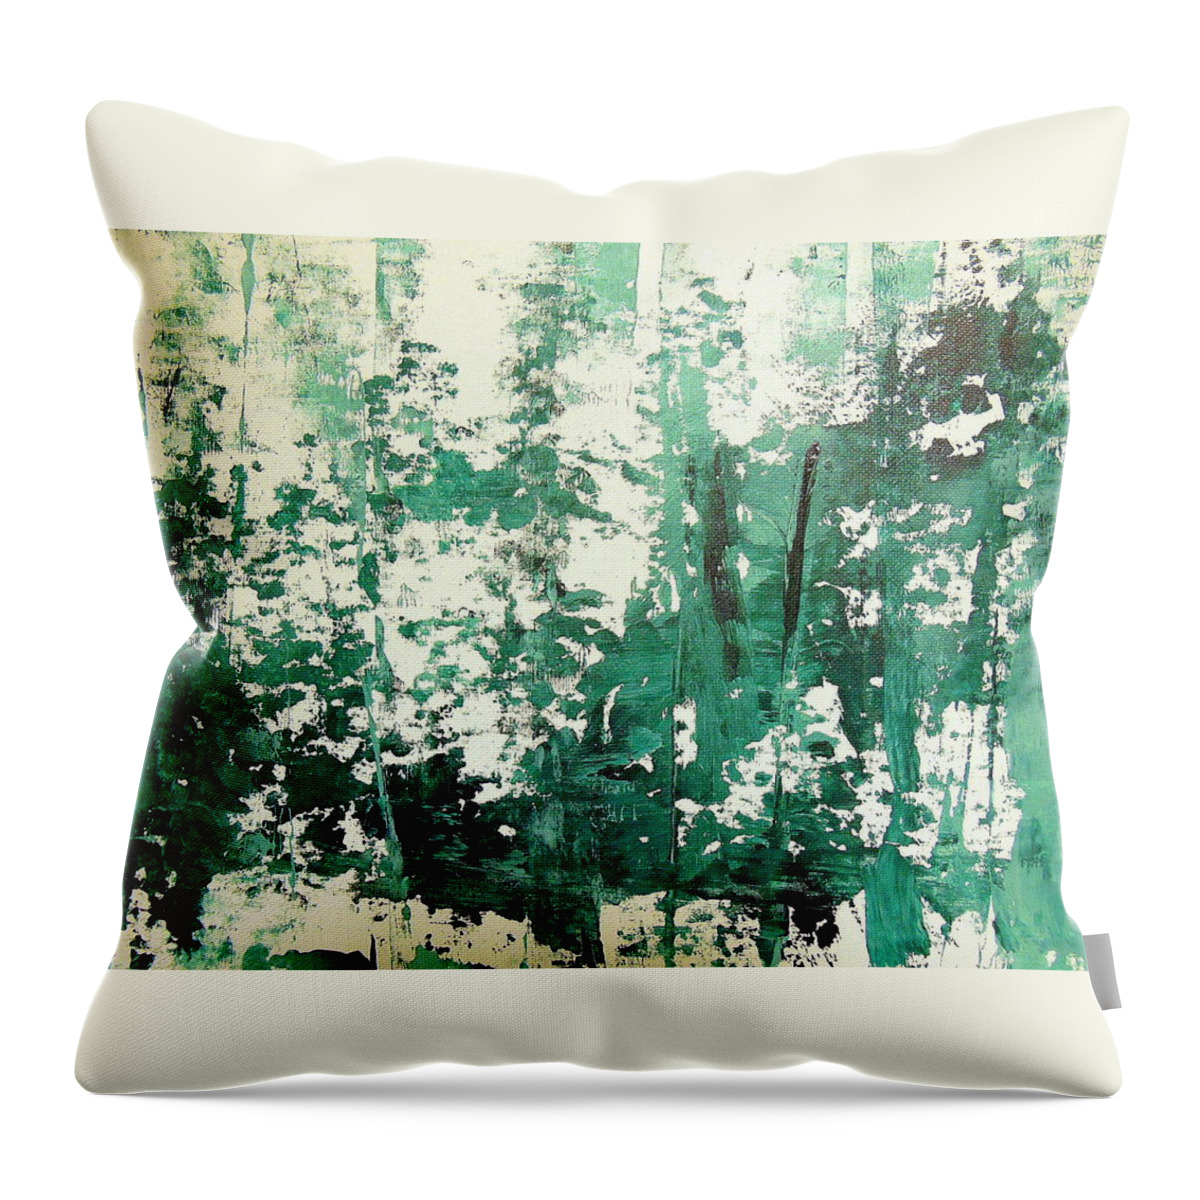 Abstract Landscape Throw Pillow featuring the painting Where are you by Aimee Bruno